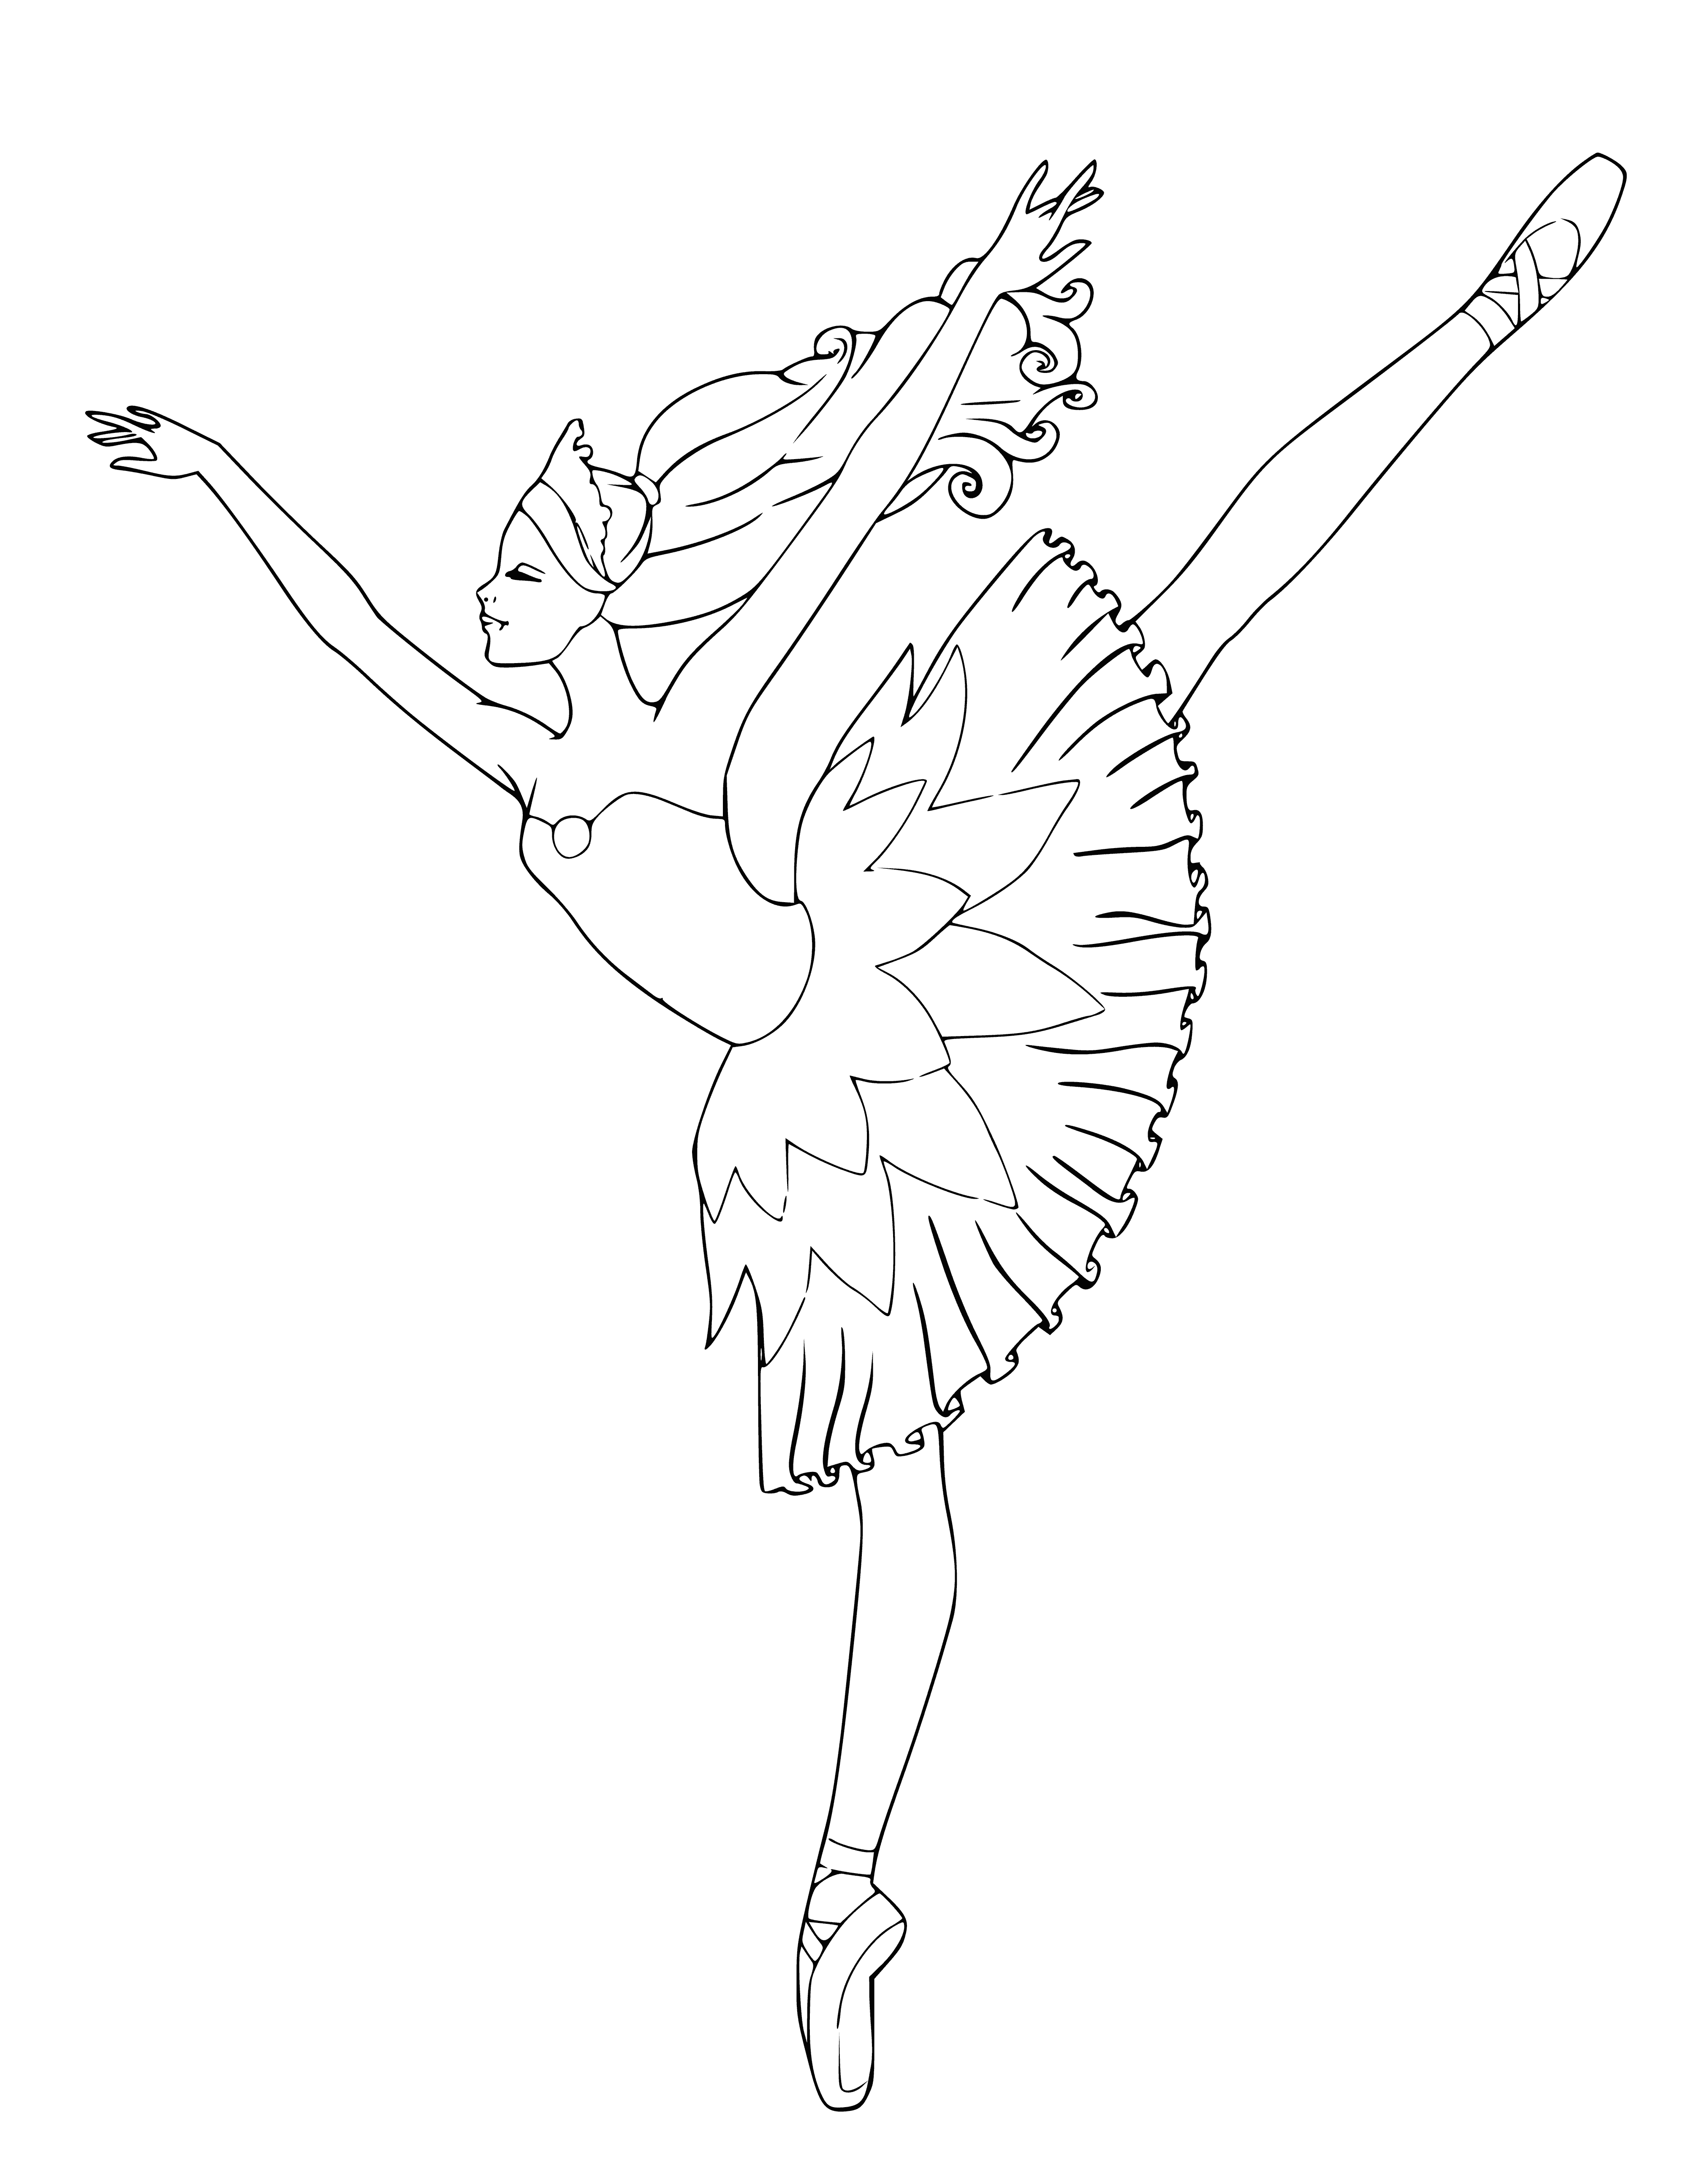 coloring page: Group of ballerinas performing on stage in tutus and pointe shoes; some dancing en pointe and others doing pirouettes; audience clapping and cheering. #ballerinas #dance